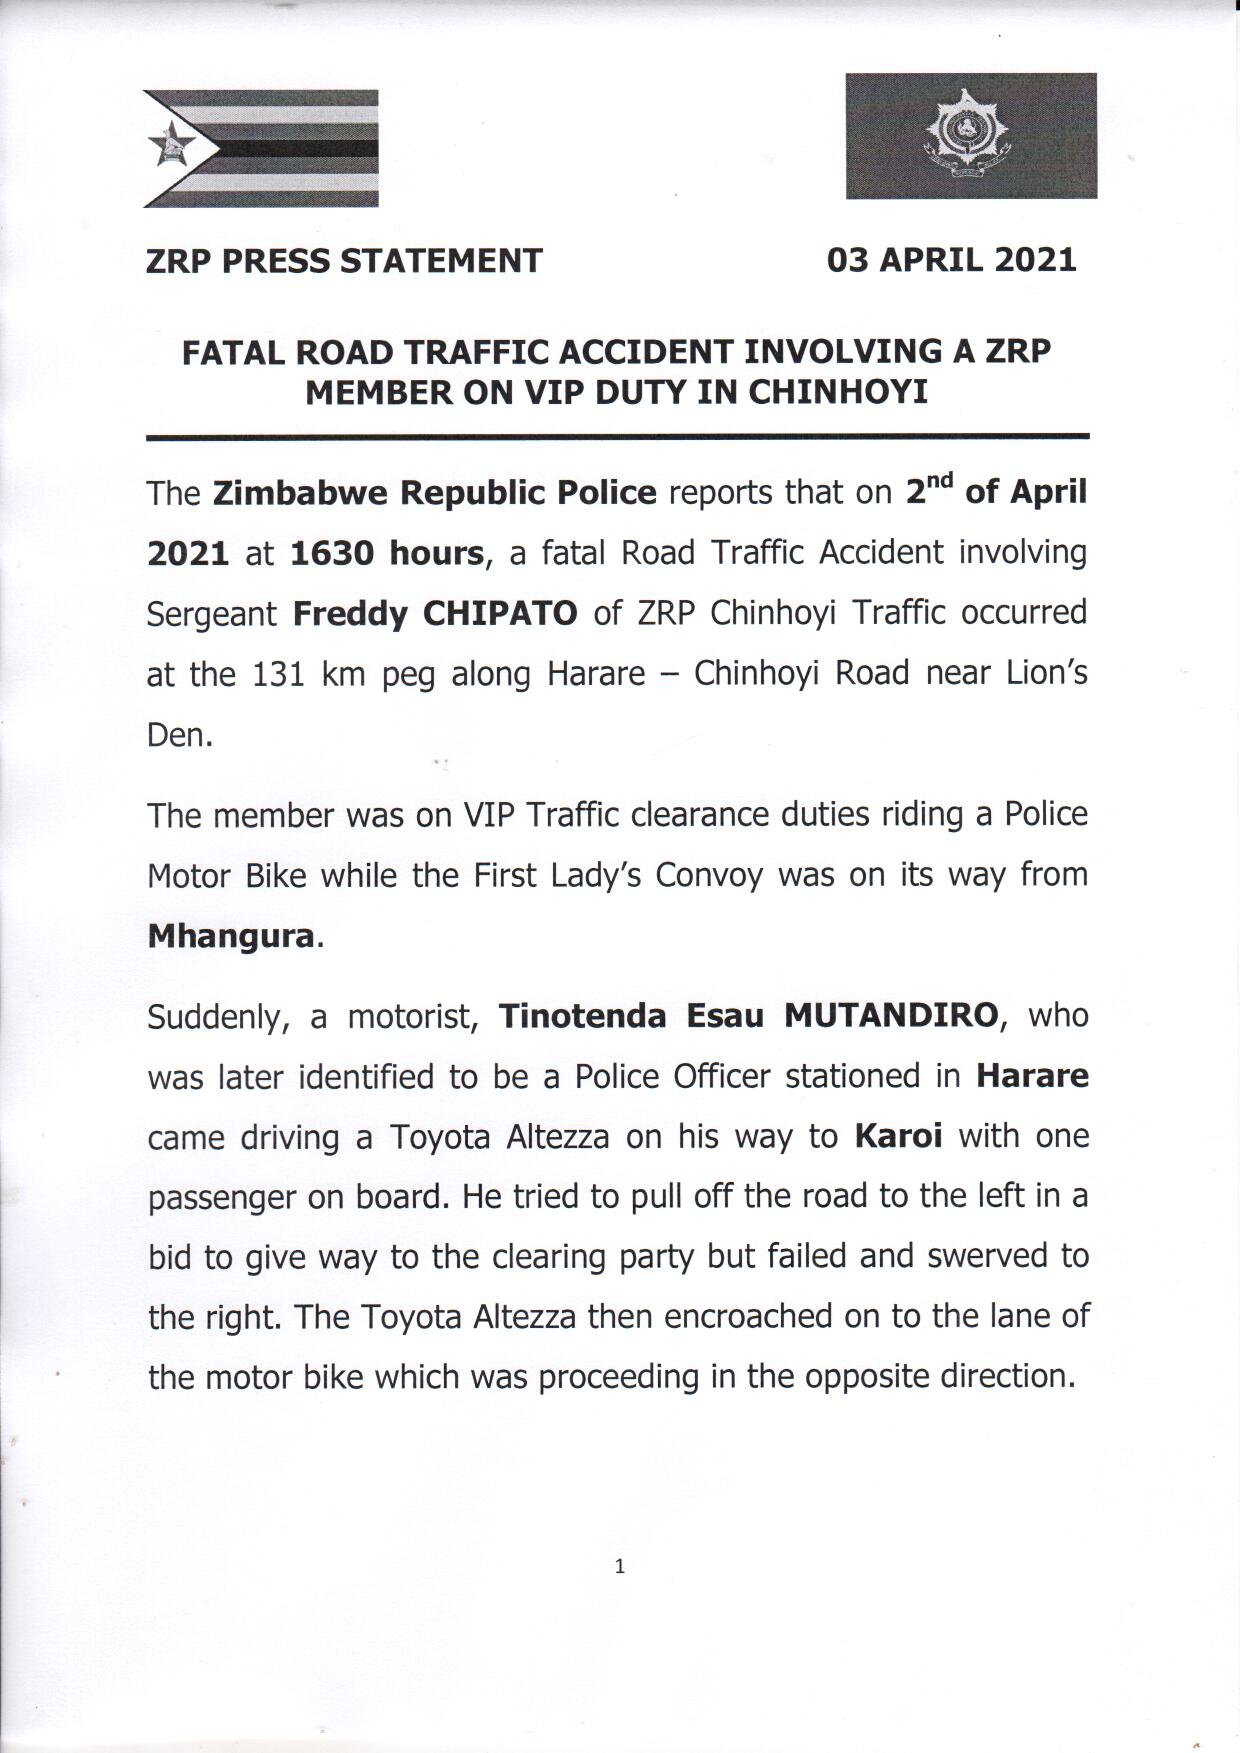 Police Officer Arrested For Causing First Lady's Motorcade Accident Which Killed Biker